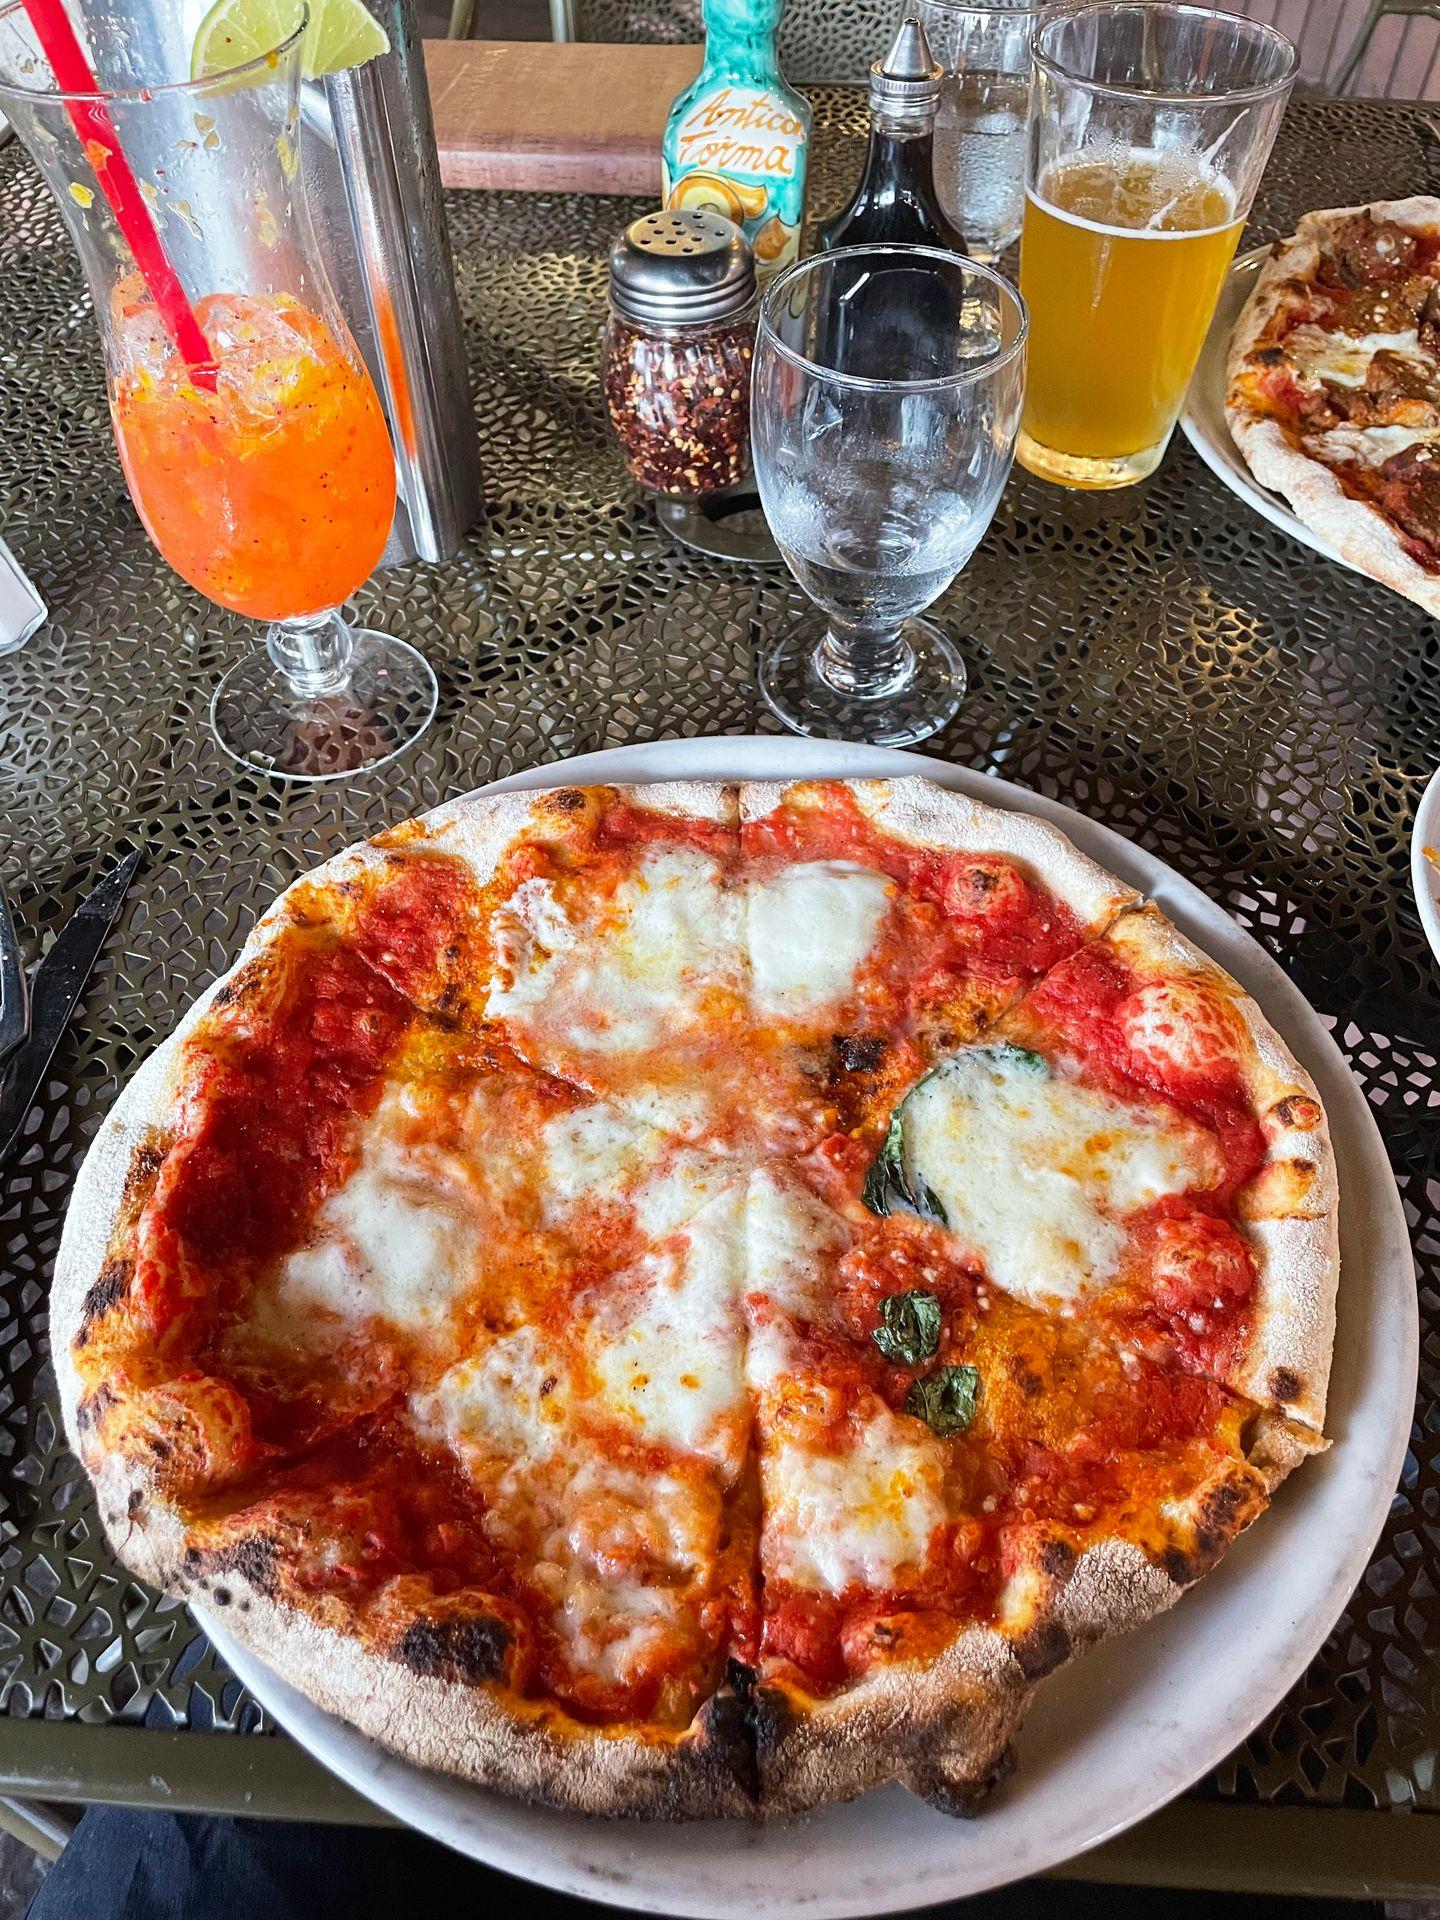 A pizza with tomato sauce and mozzarella cheese from Antica Forma.